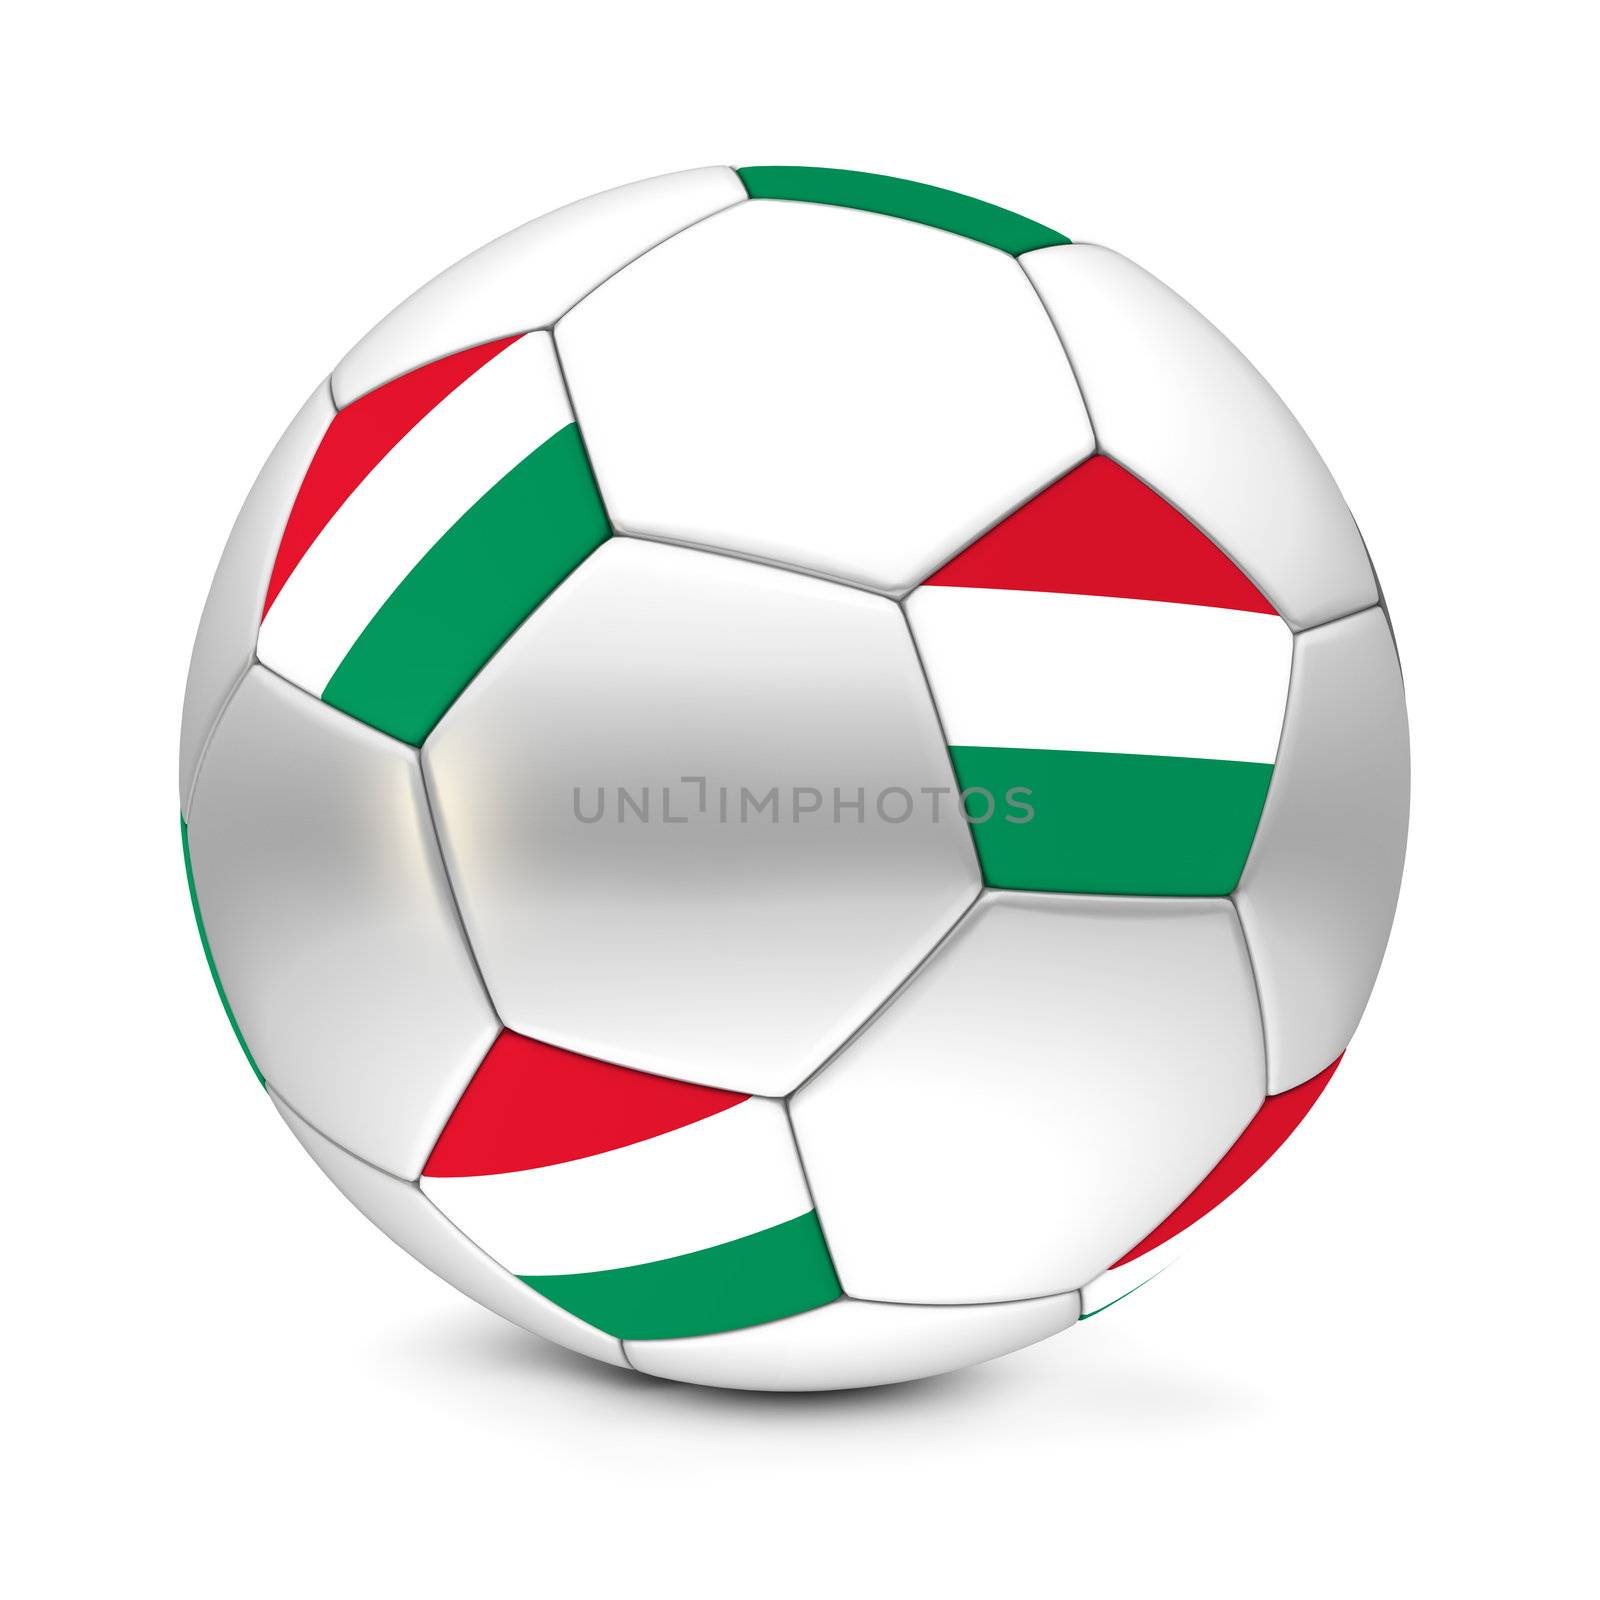 shiny football/soccer ball with the flag of Hungary on the pentagons